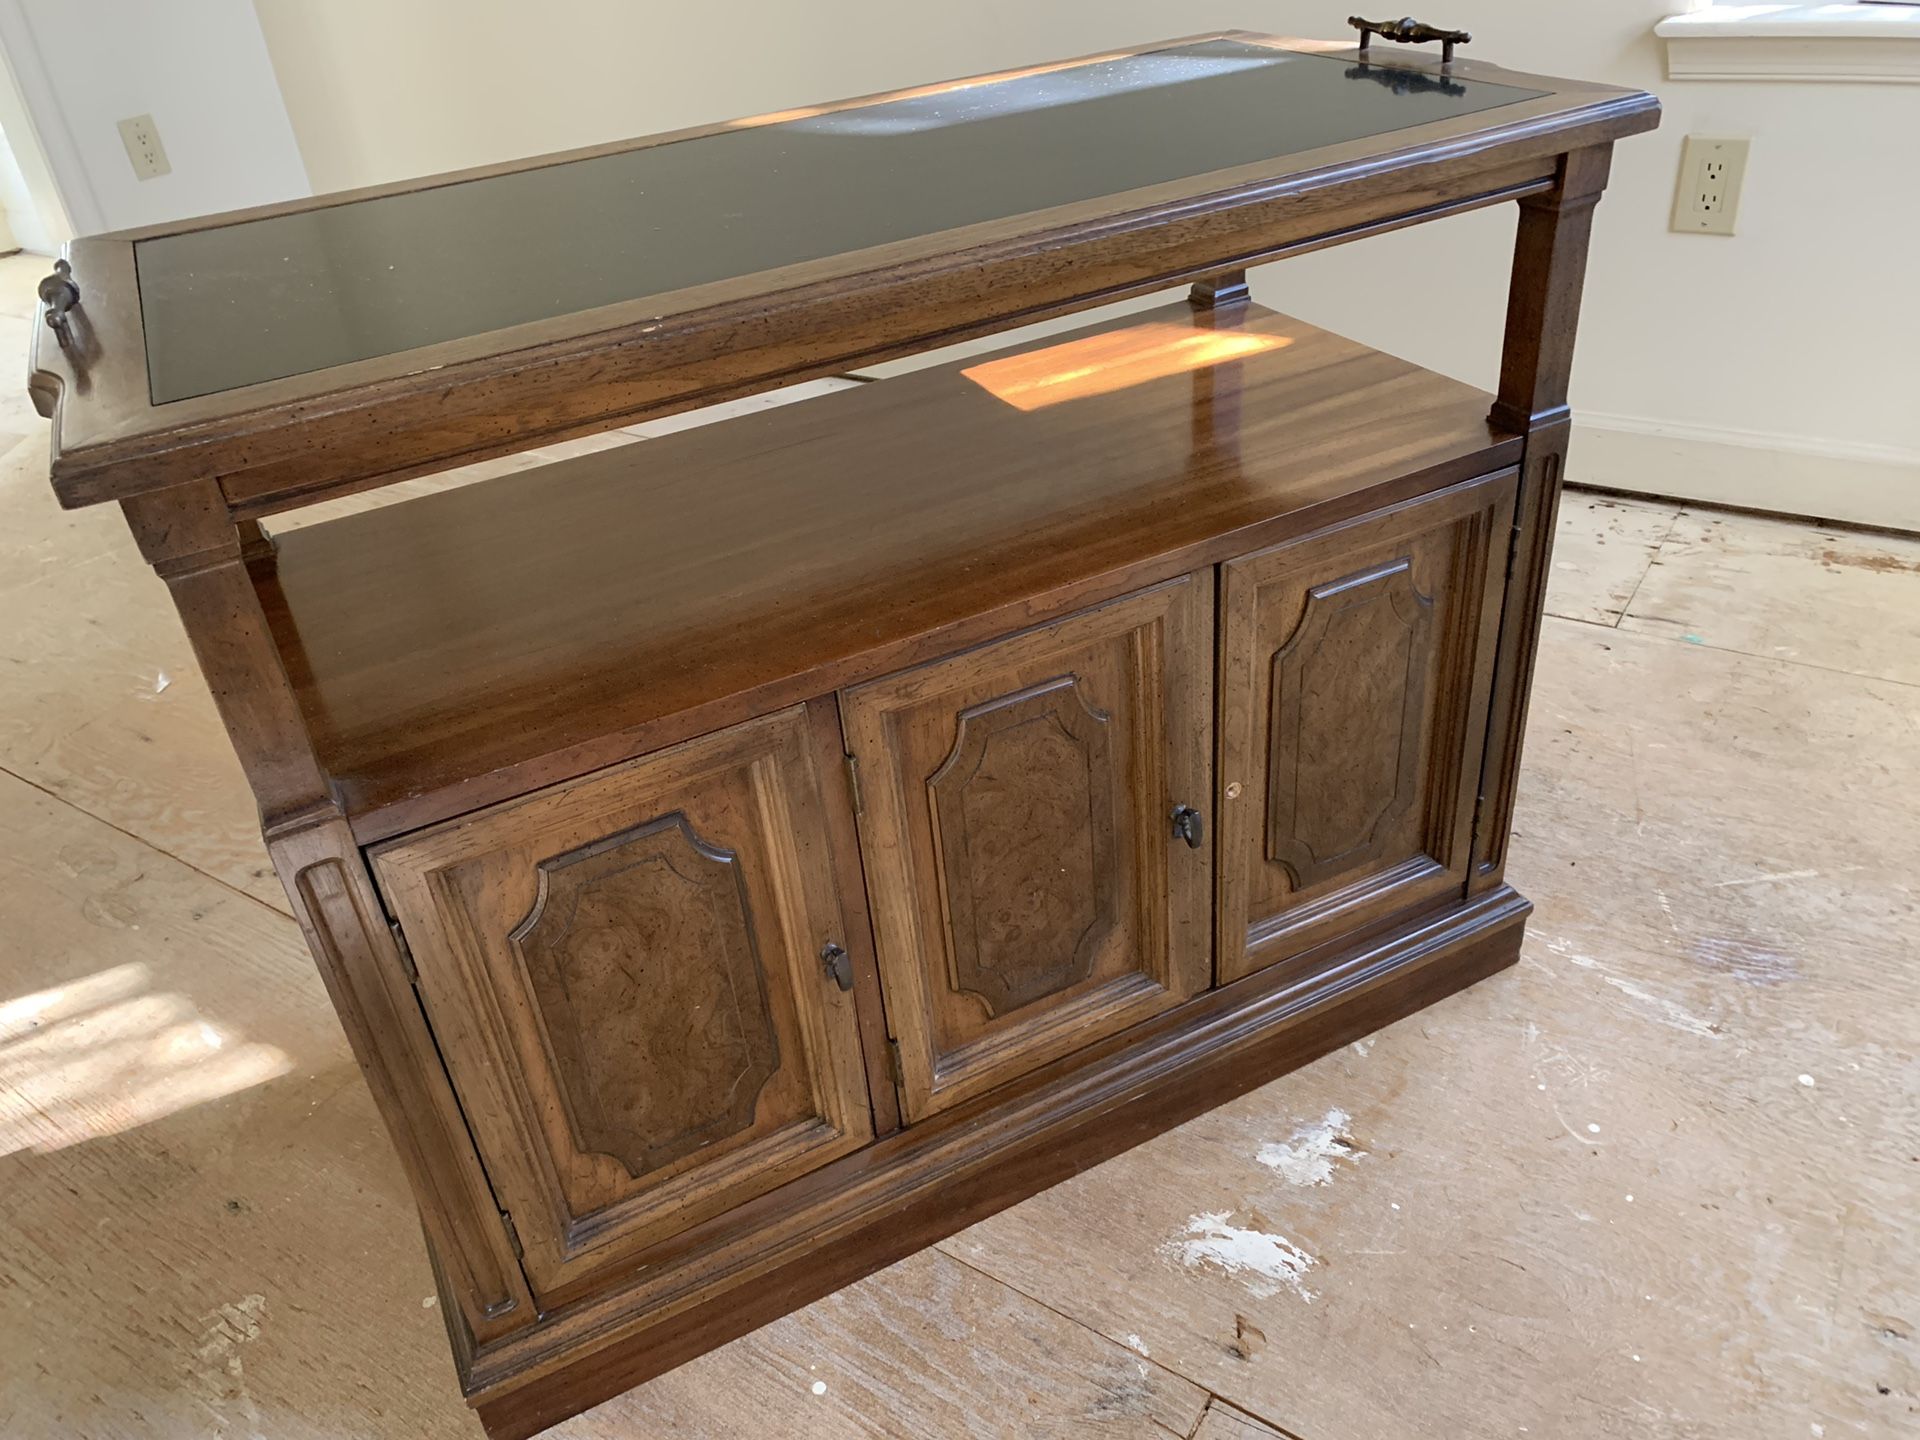 Serving Cart or TV Stand. Name your price. Everything must go by 12pm 12/30/19.